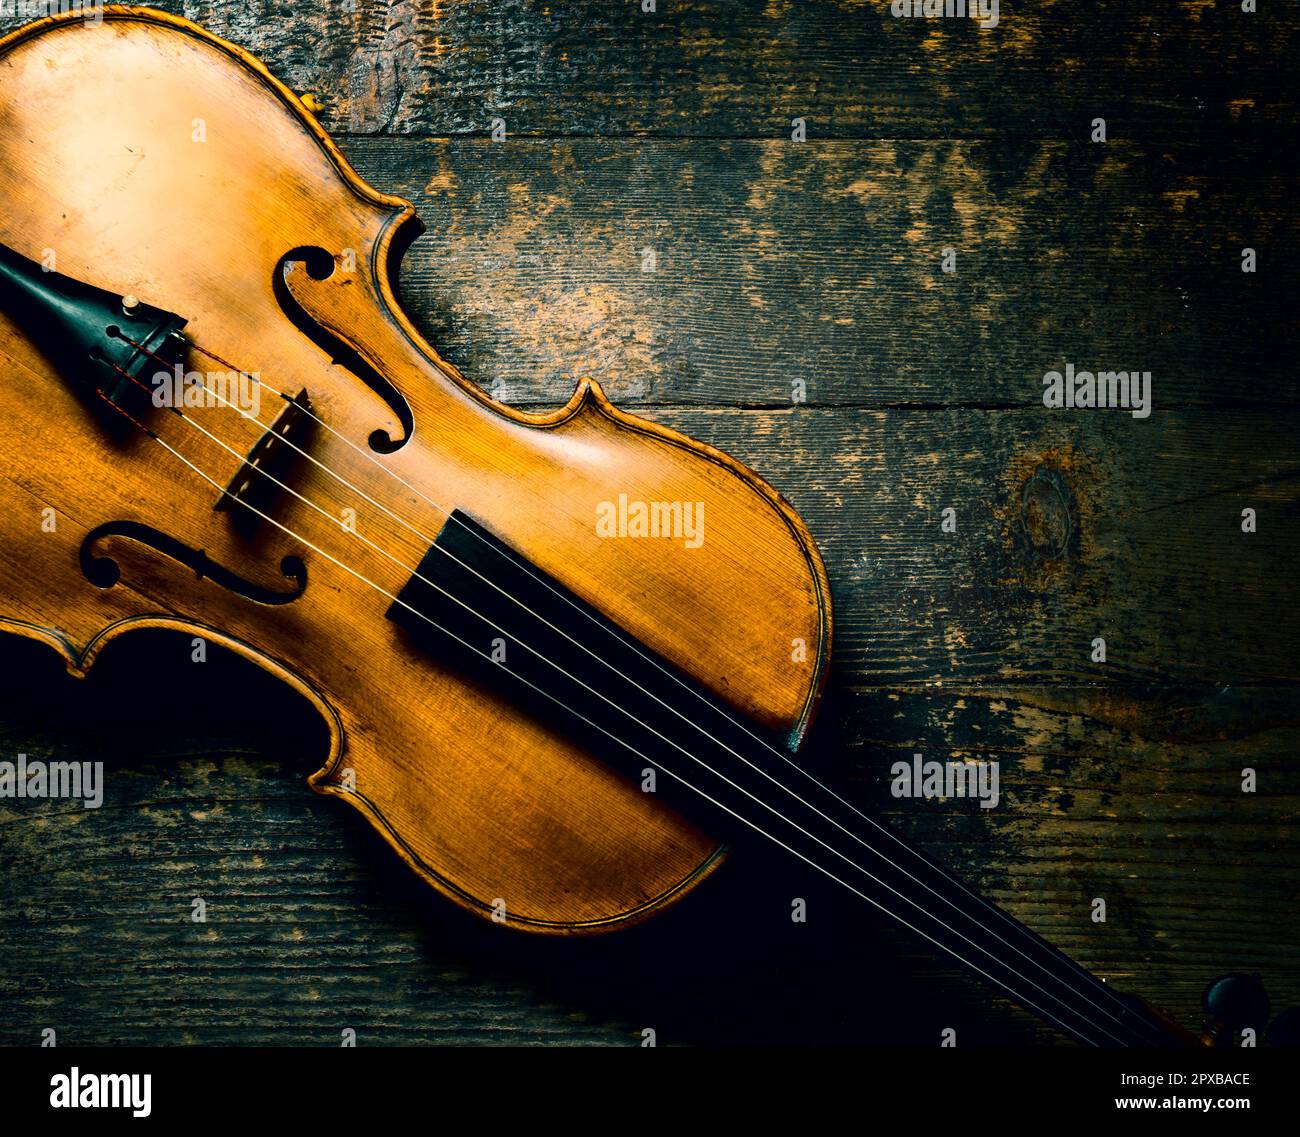 Violin on wooden background from Classical musical string instrument. Classic music concept Stock Photo Alamy